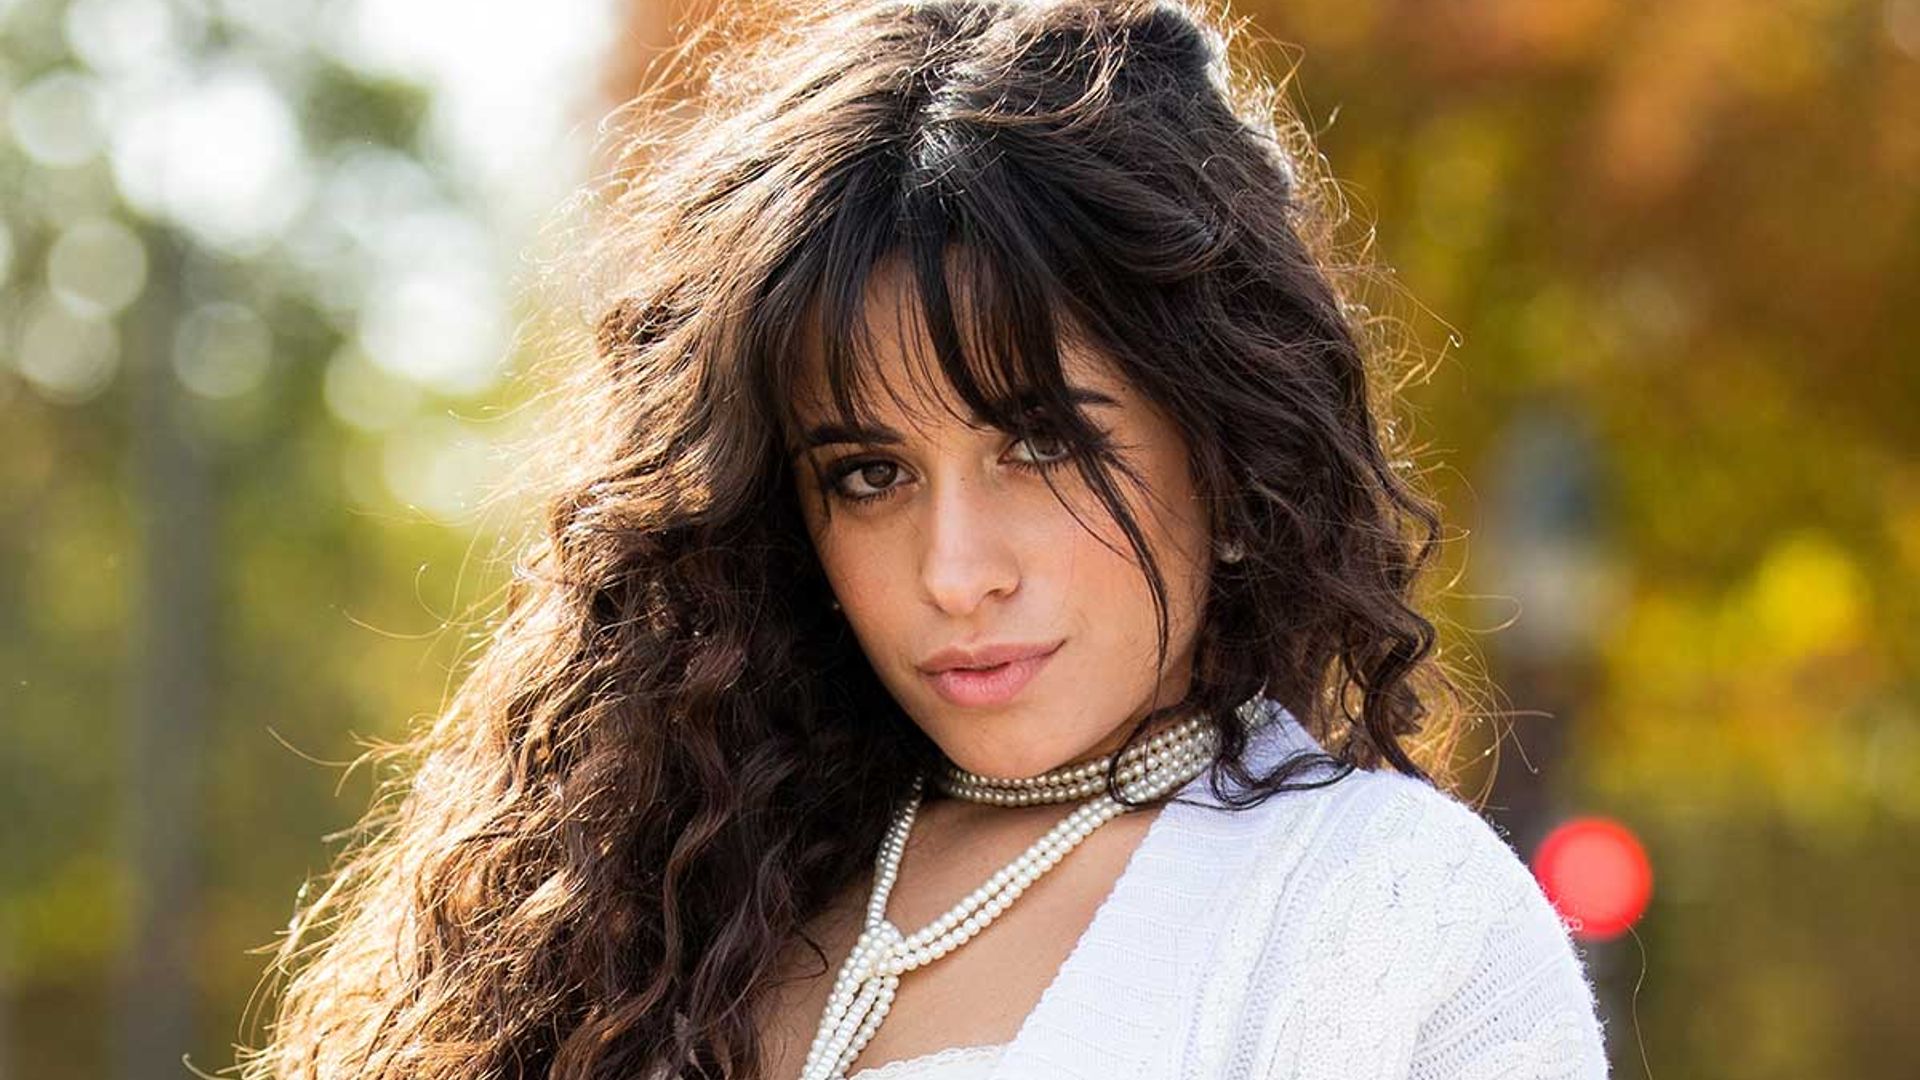 Camila Cabello swears by this L’Oreal serum - and it’s on sale now